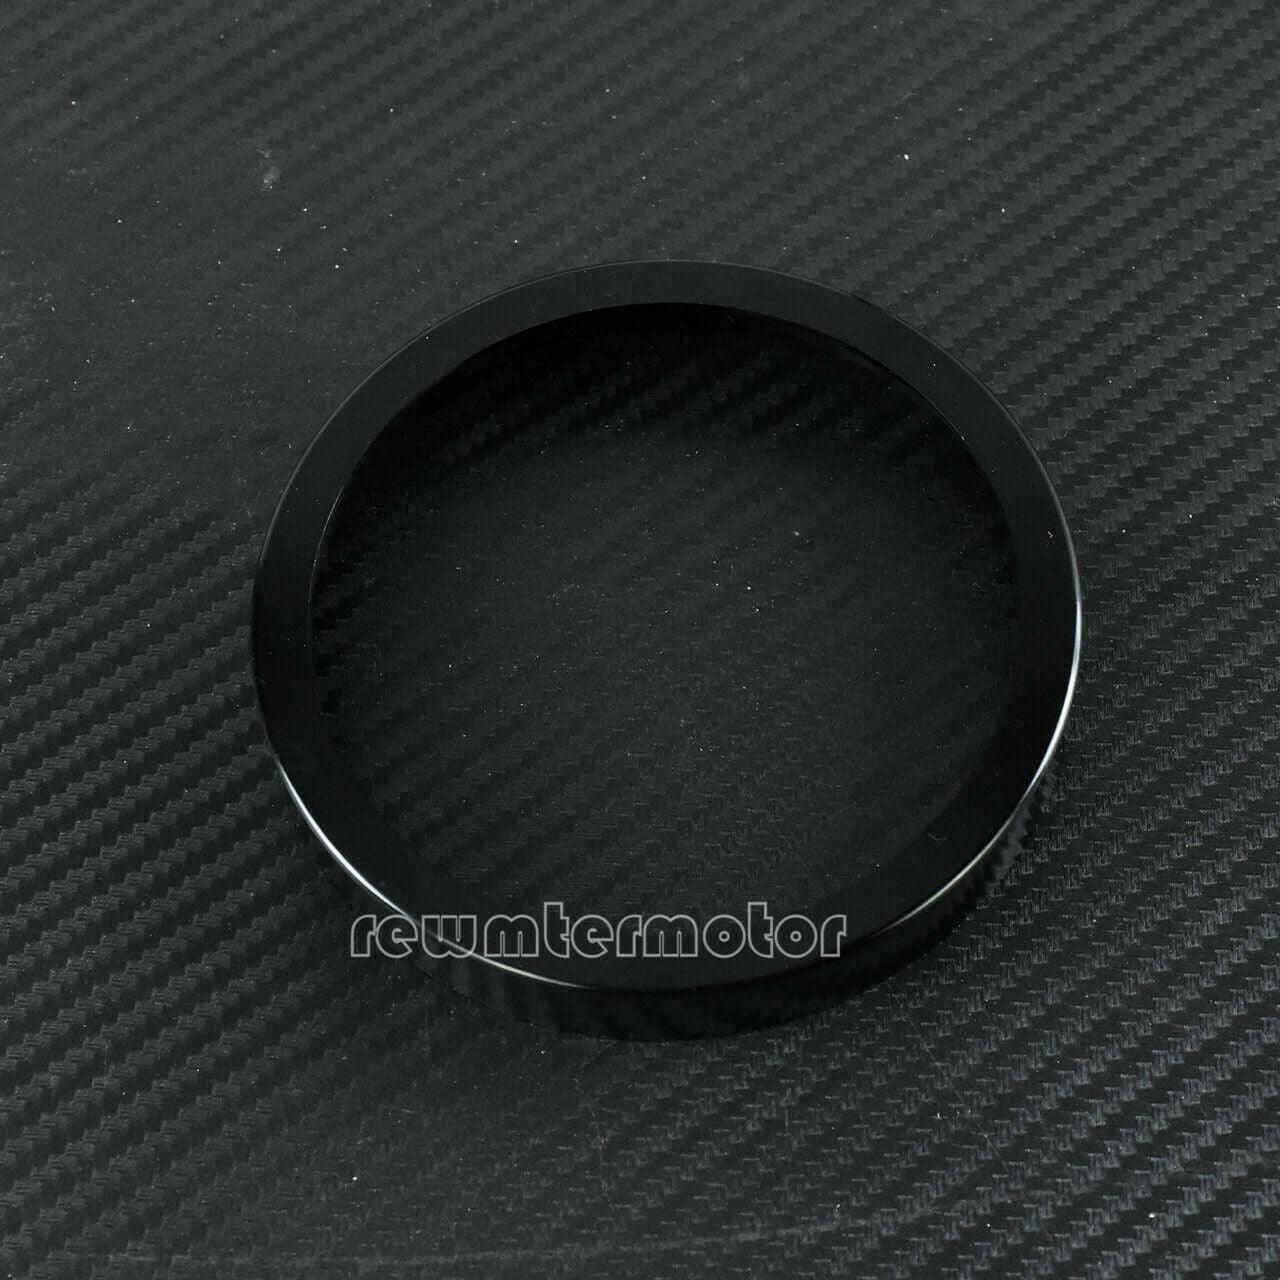 Black Speedometer Gauge Accent Trim Ring Fit For Dyna Electra Glide Breakout - Moto Life Products